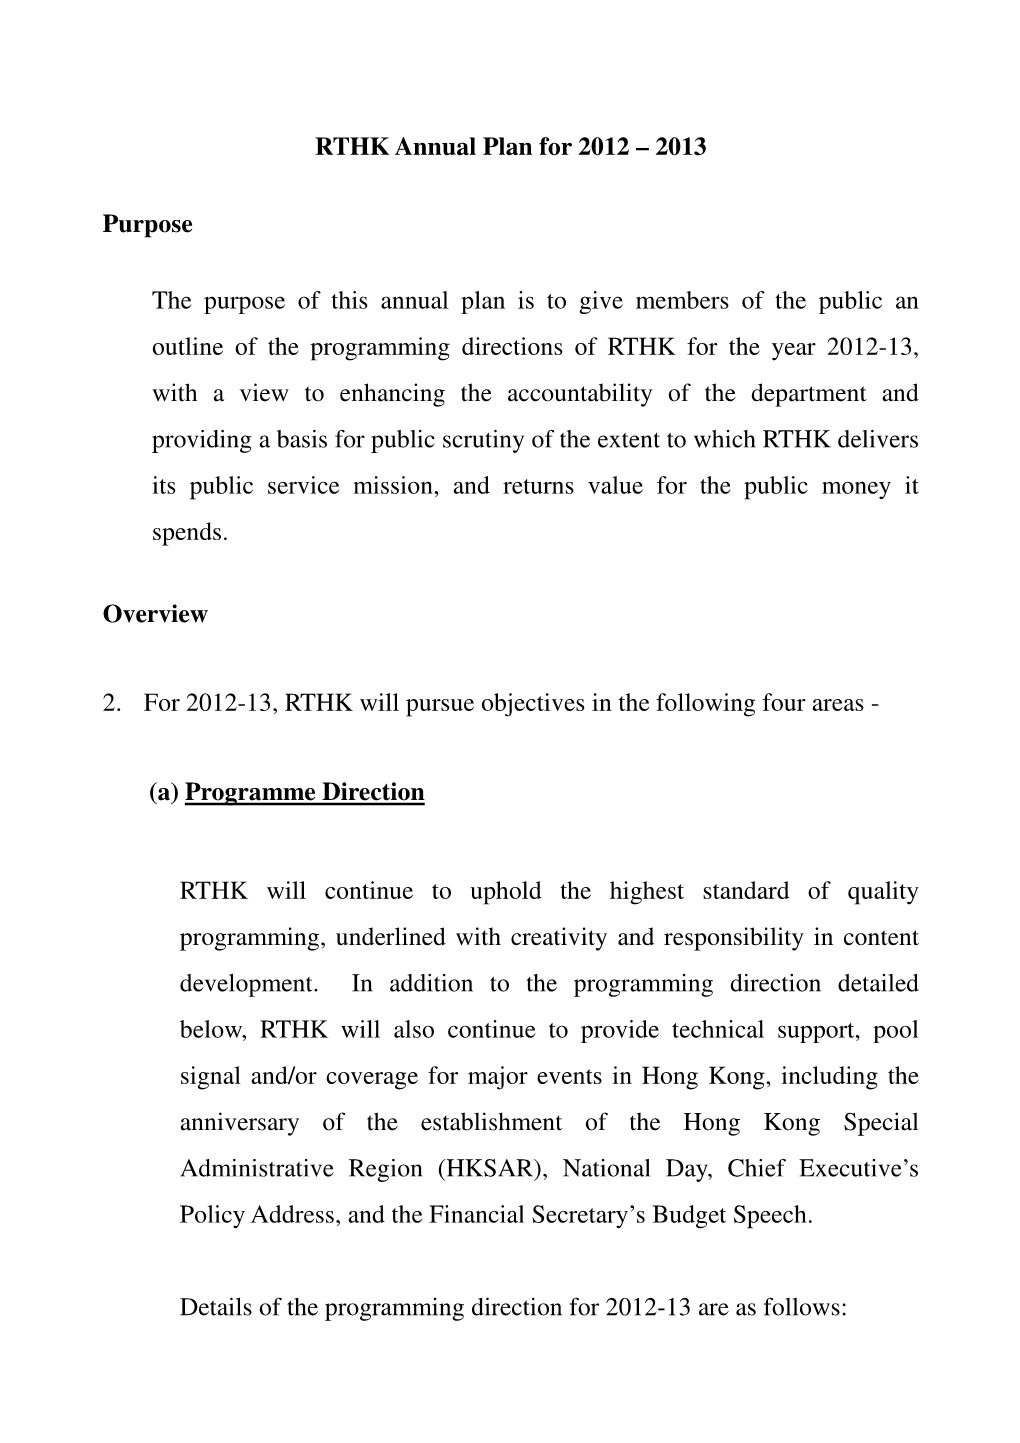 RTHK Annual Plan for 2012 – 2013 Purpose the Purpose of This Annual